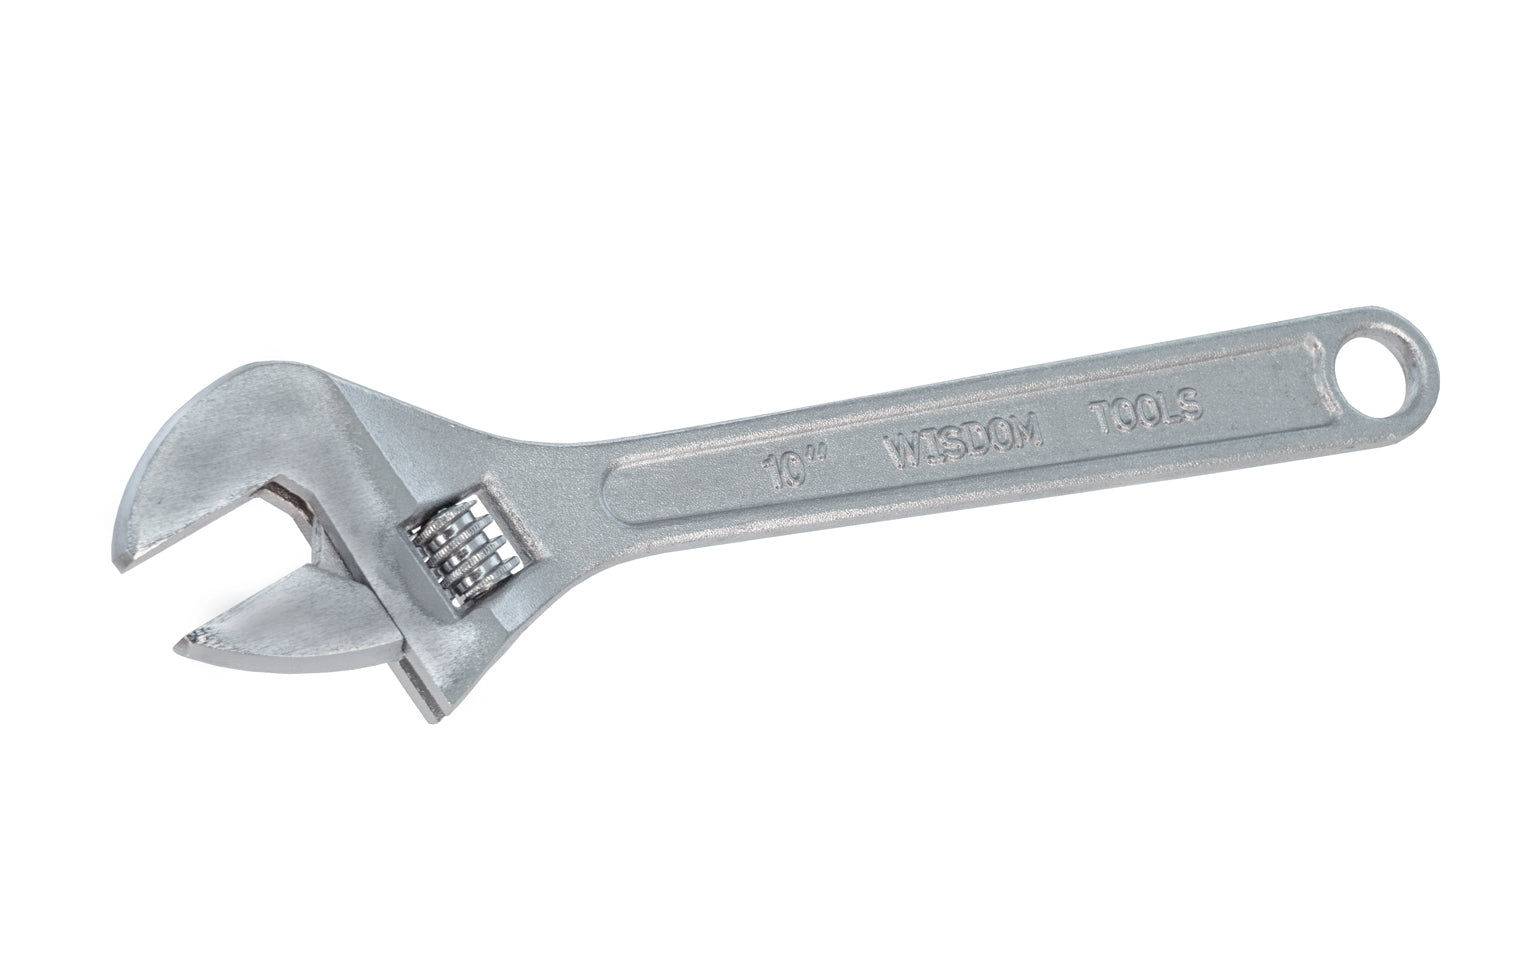 10" Adjustable Wrench - Drop Forged Steel. Wisdom Tools